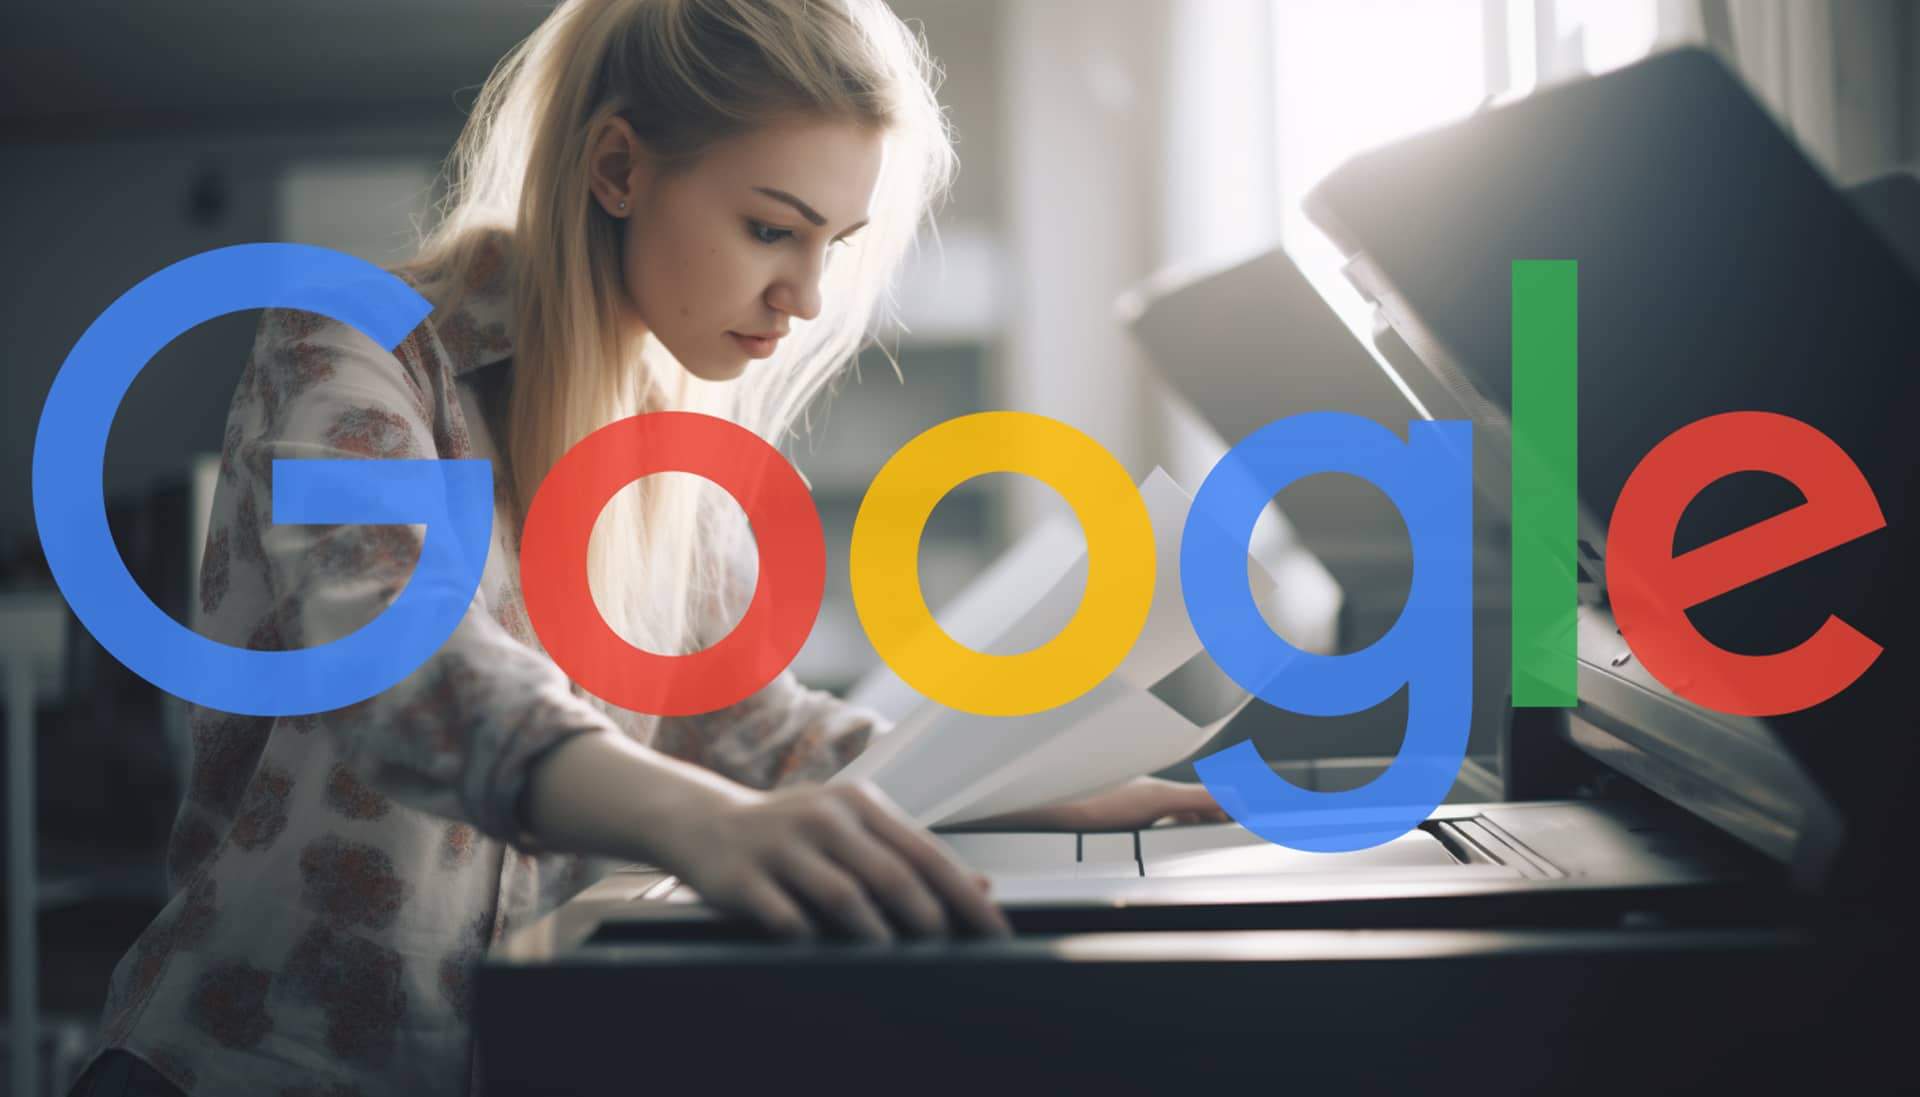 Google Ads launches new tool to help marketers reach Gen Z